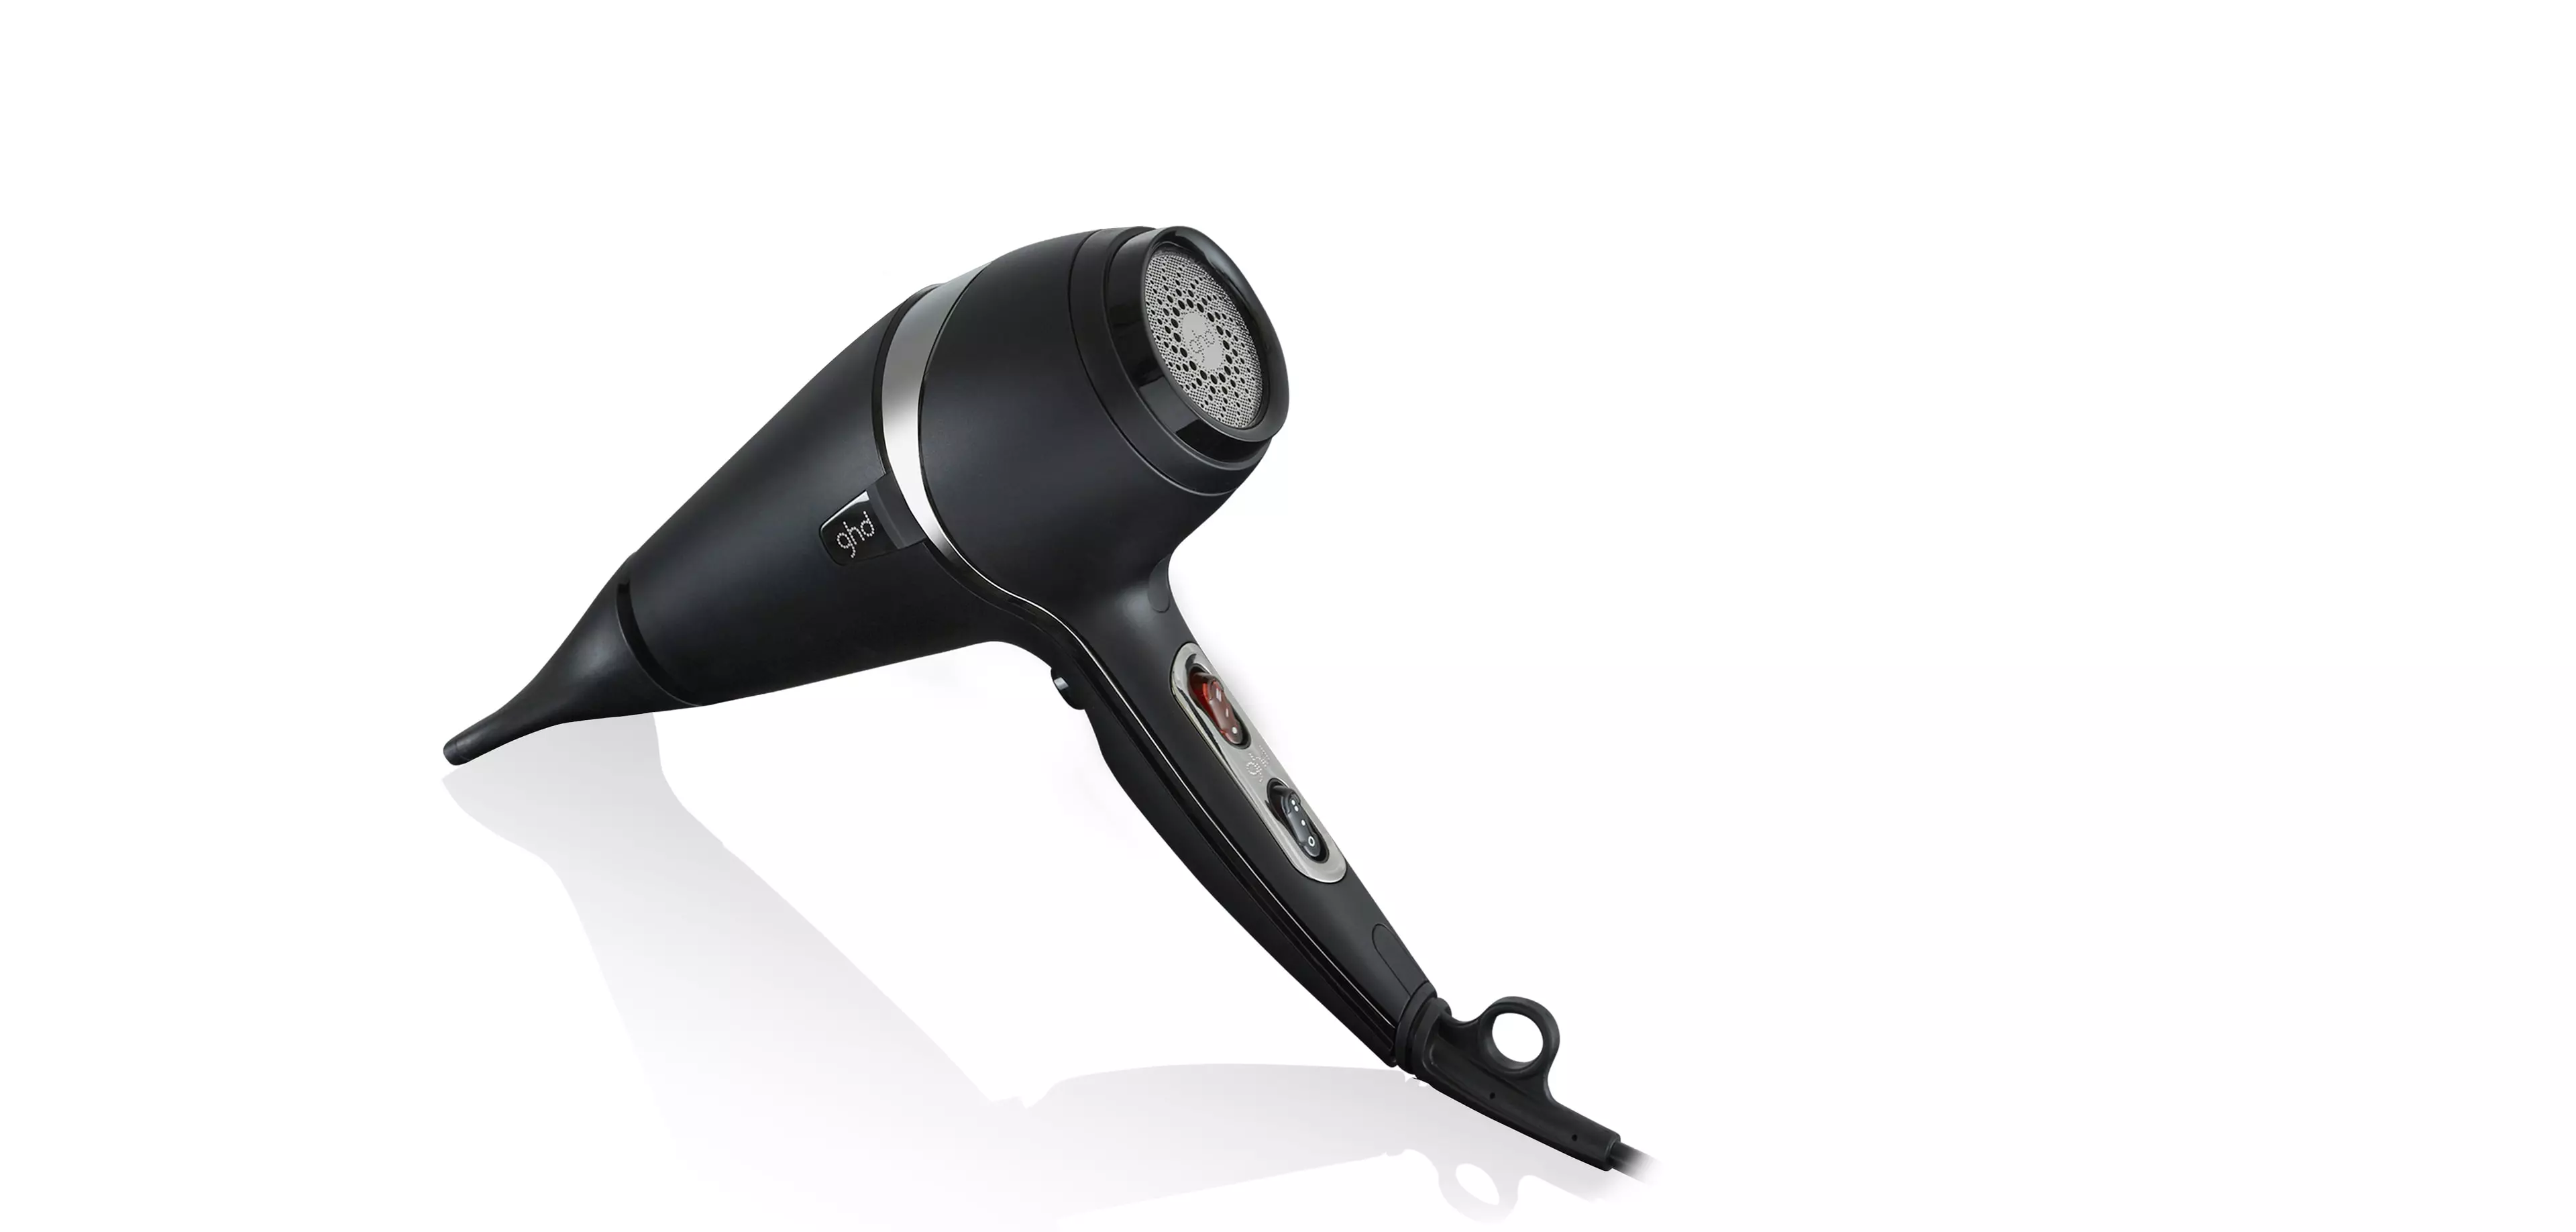 ghd Air 1600w Professional Hair Dryer, Powerful Professional Strength Blow Dryer, Ionic Portable Hair Dryer Black